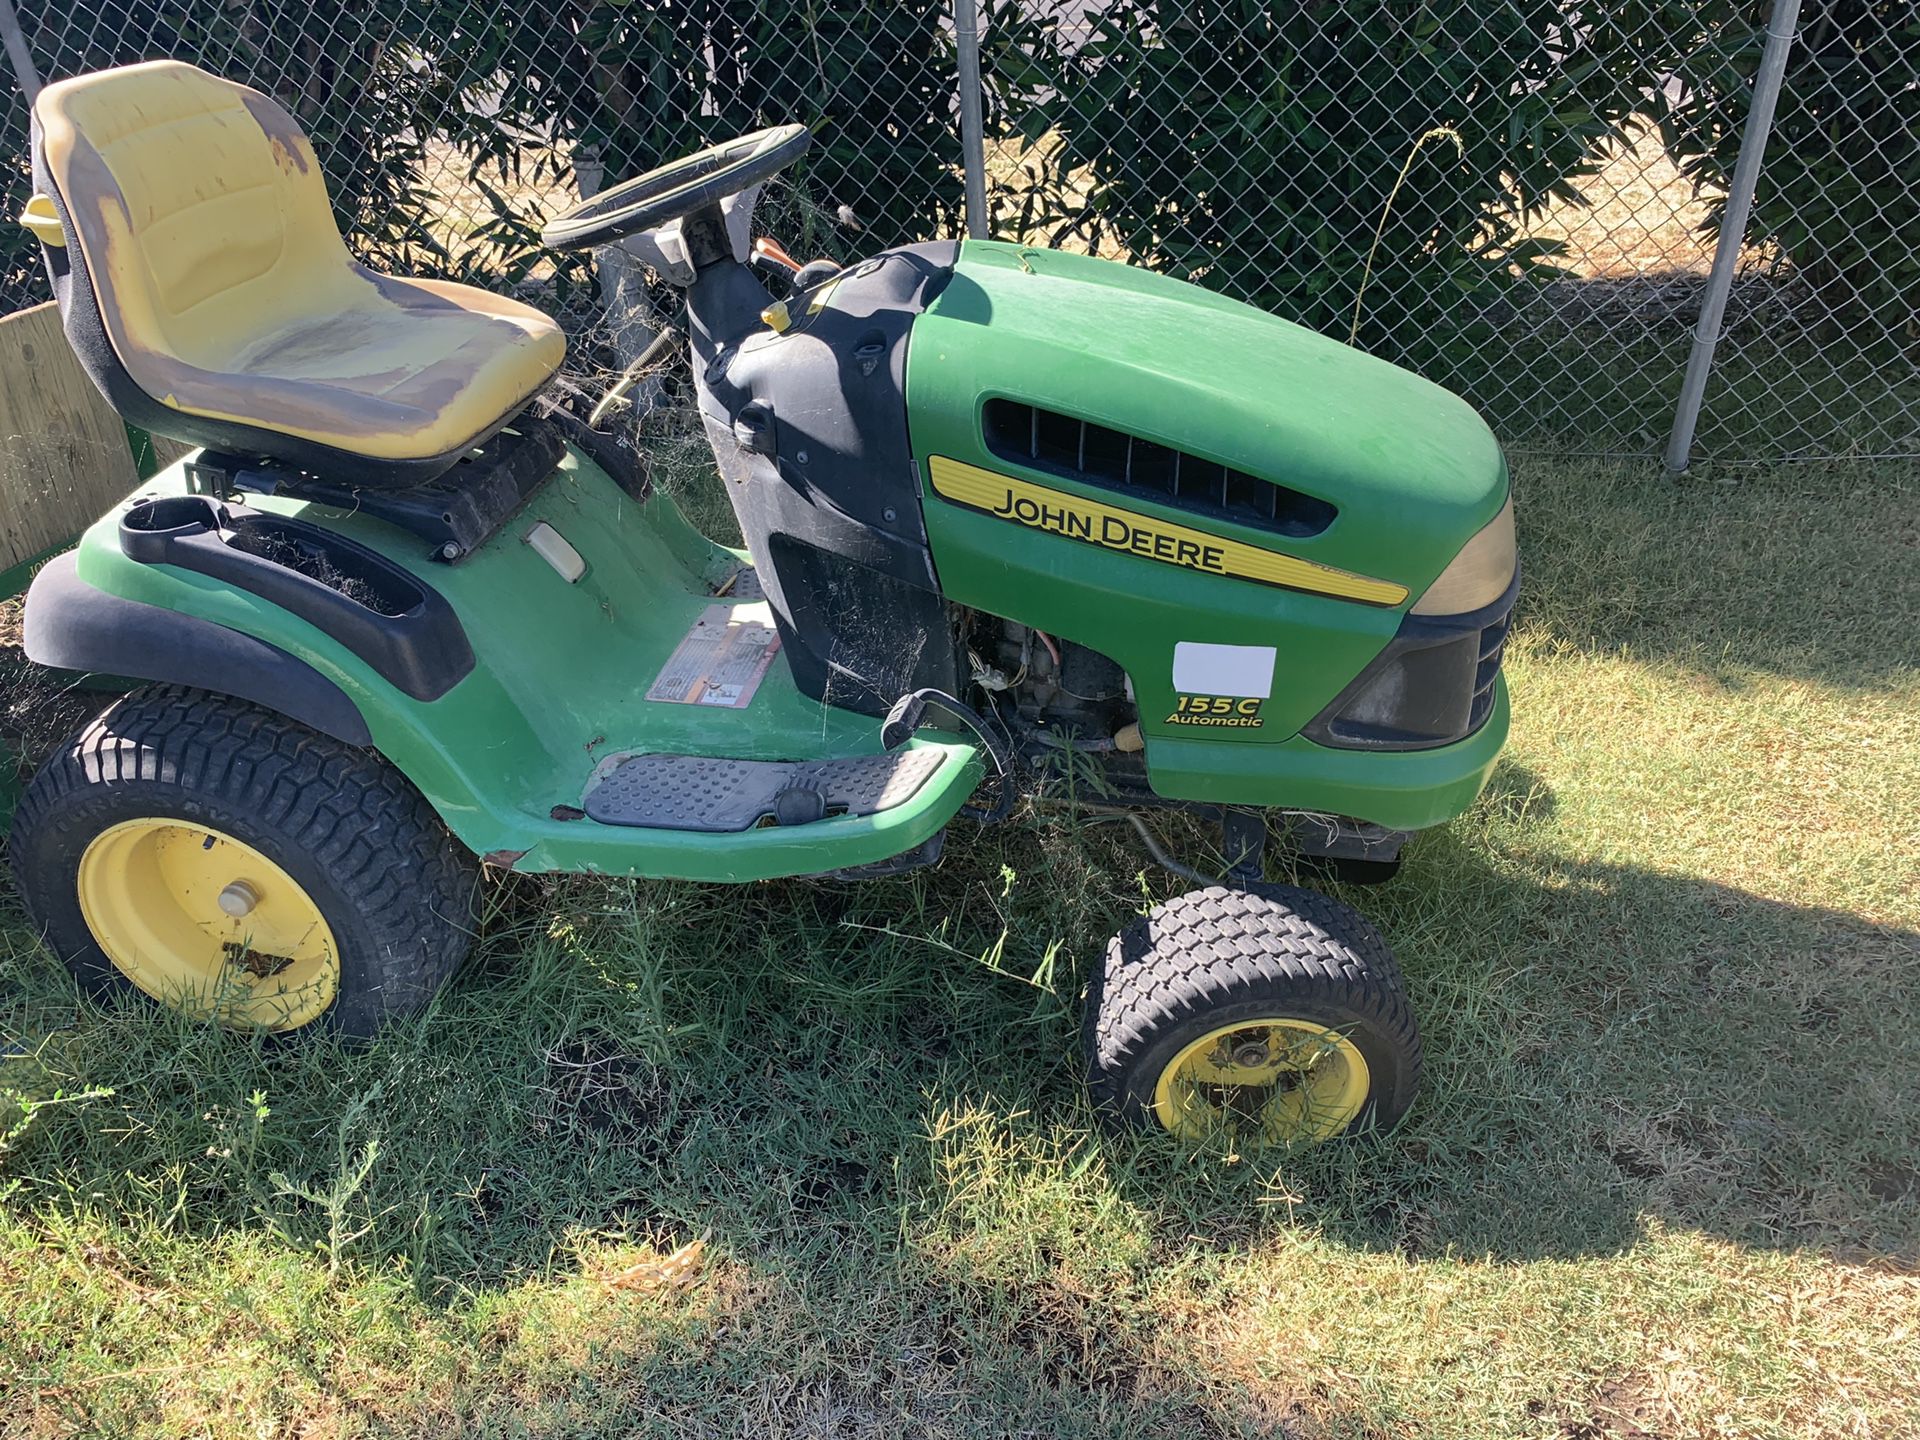 John Deere 155C 25 hp for parts mower deck also included needs pulley